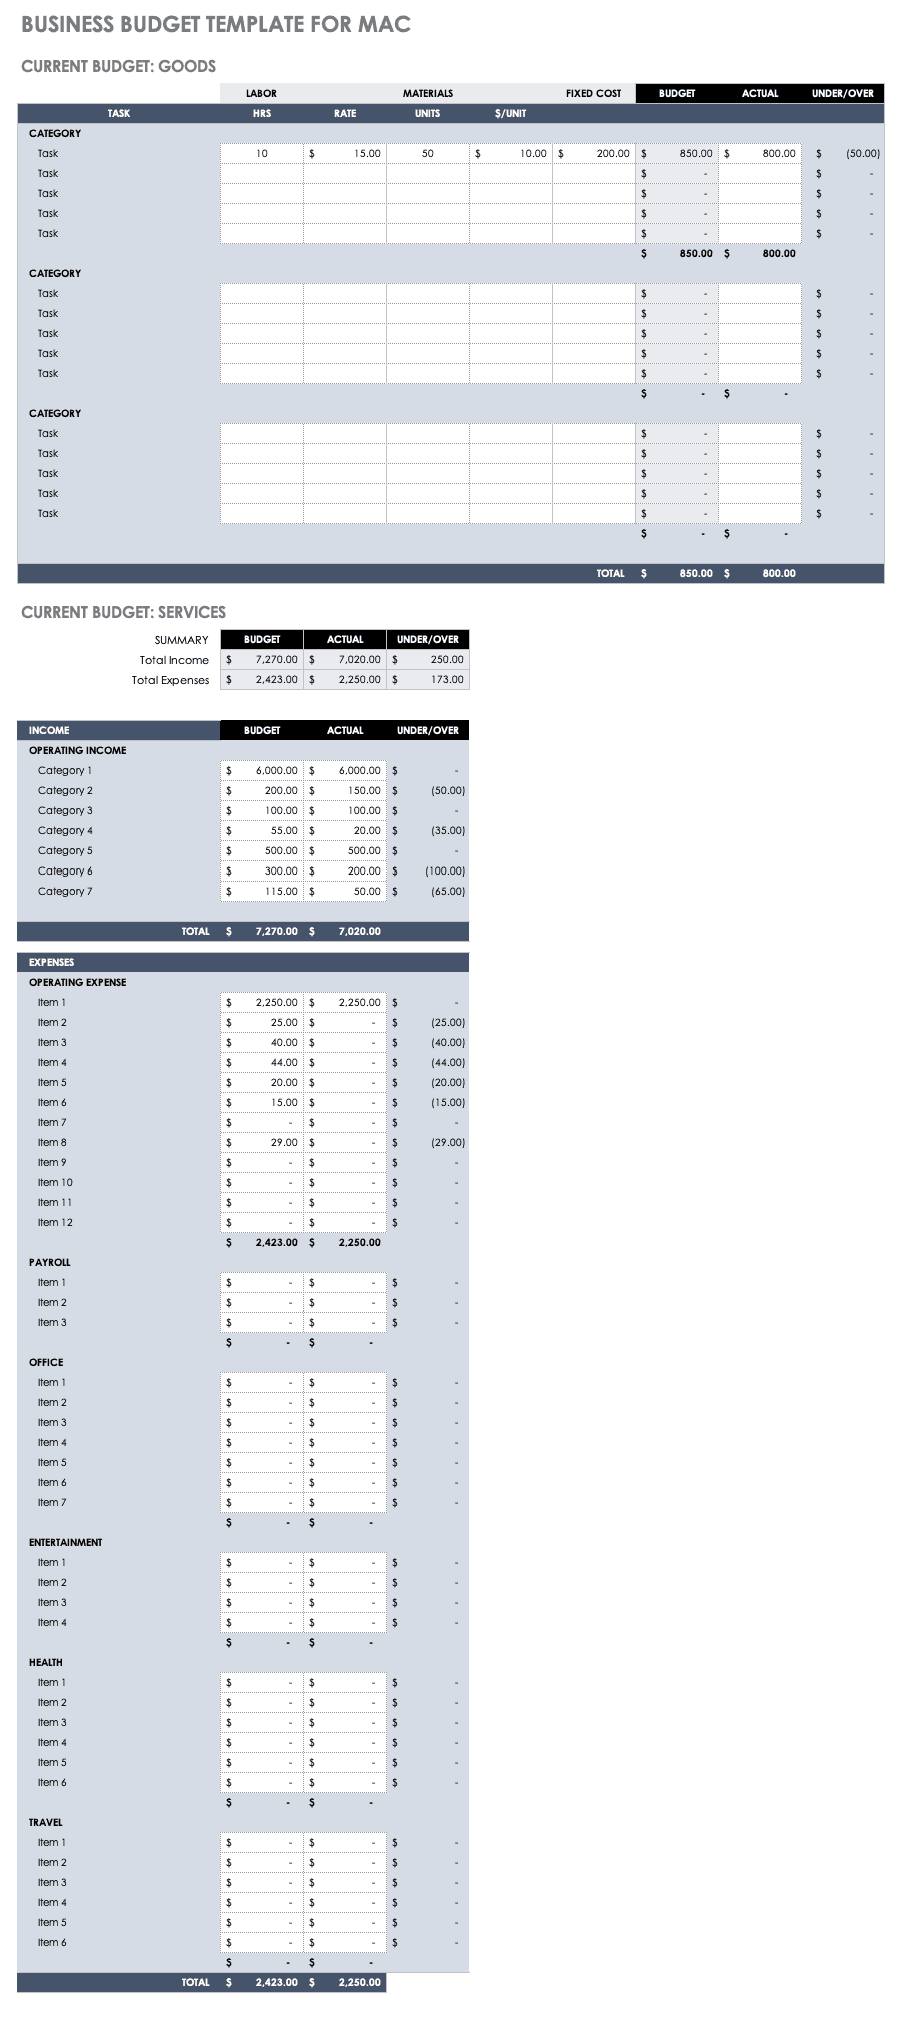 Business Budget Template for Mac